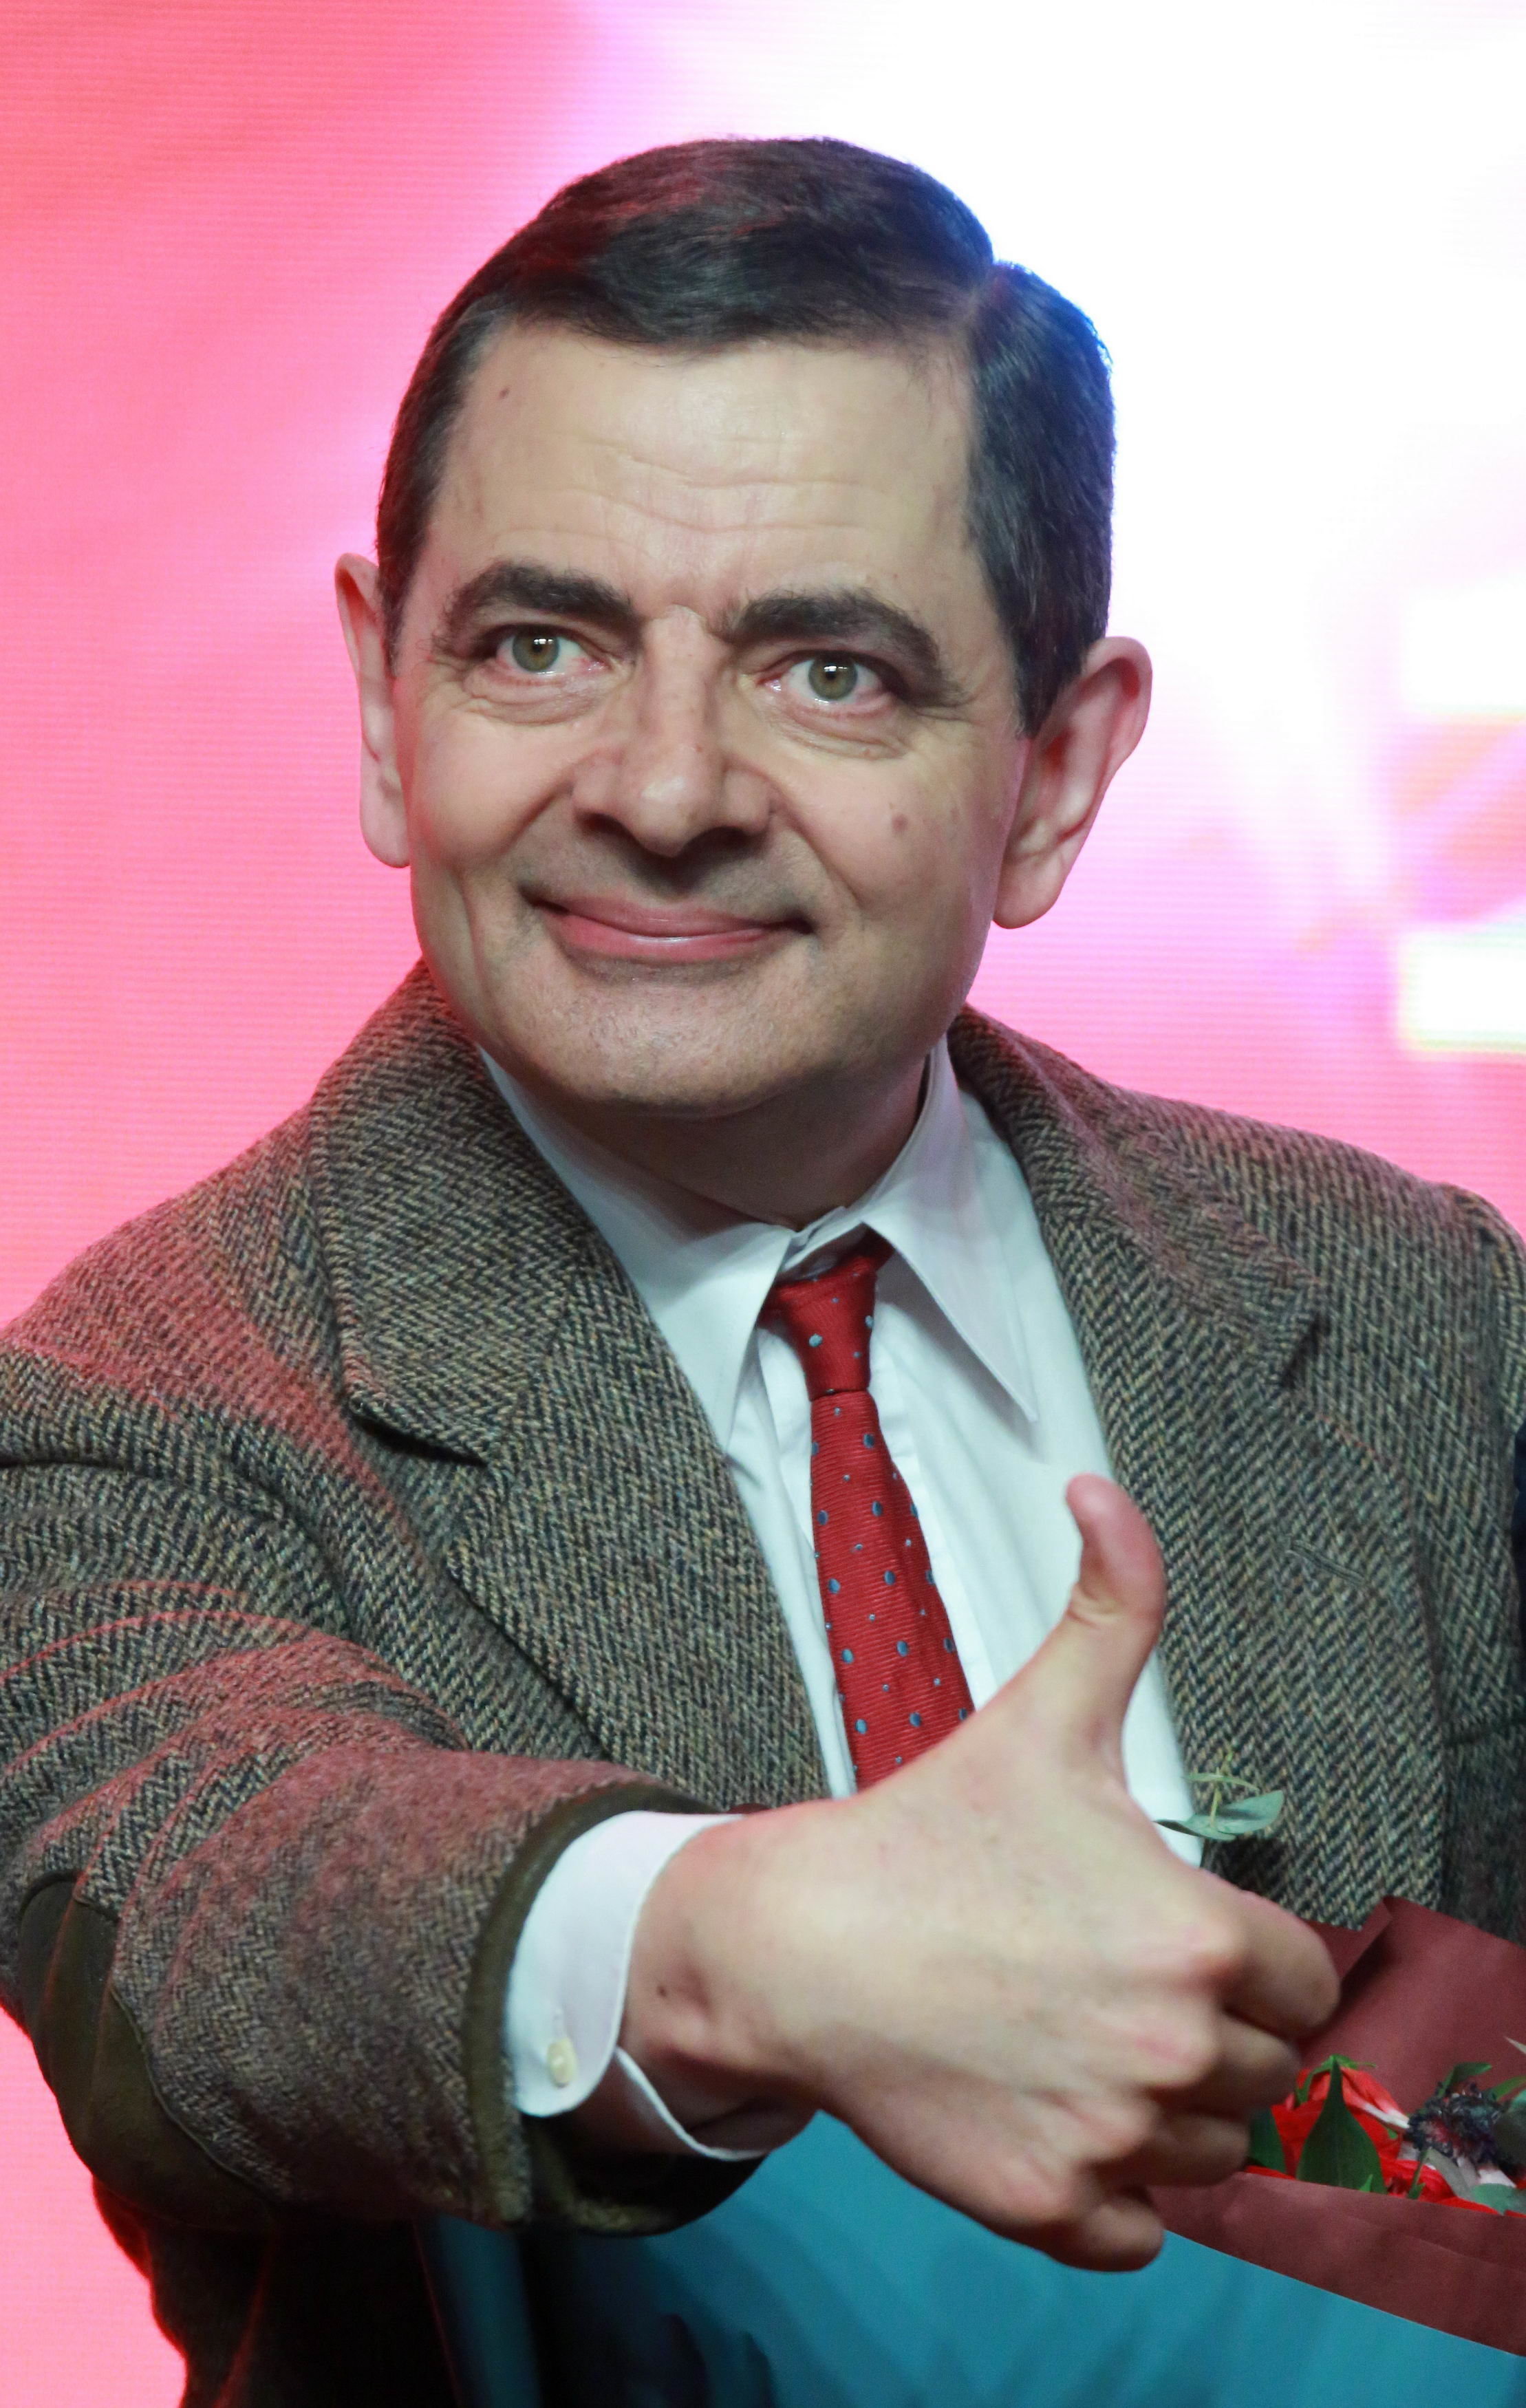 mr bean young